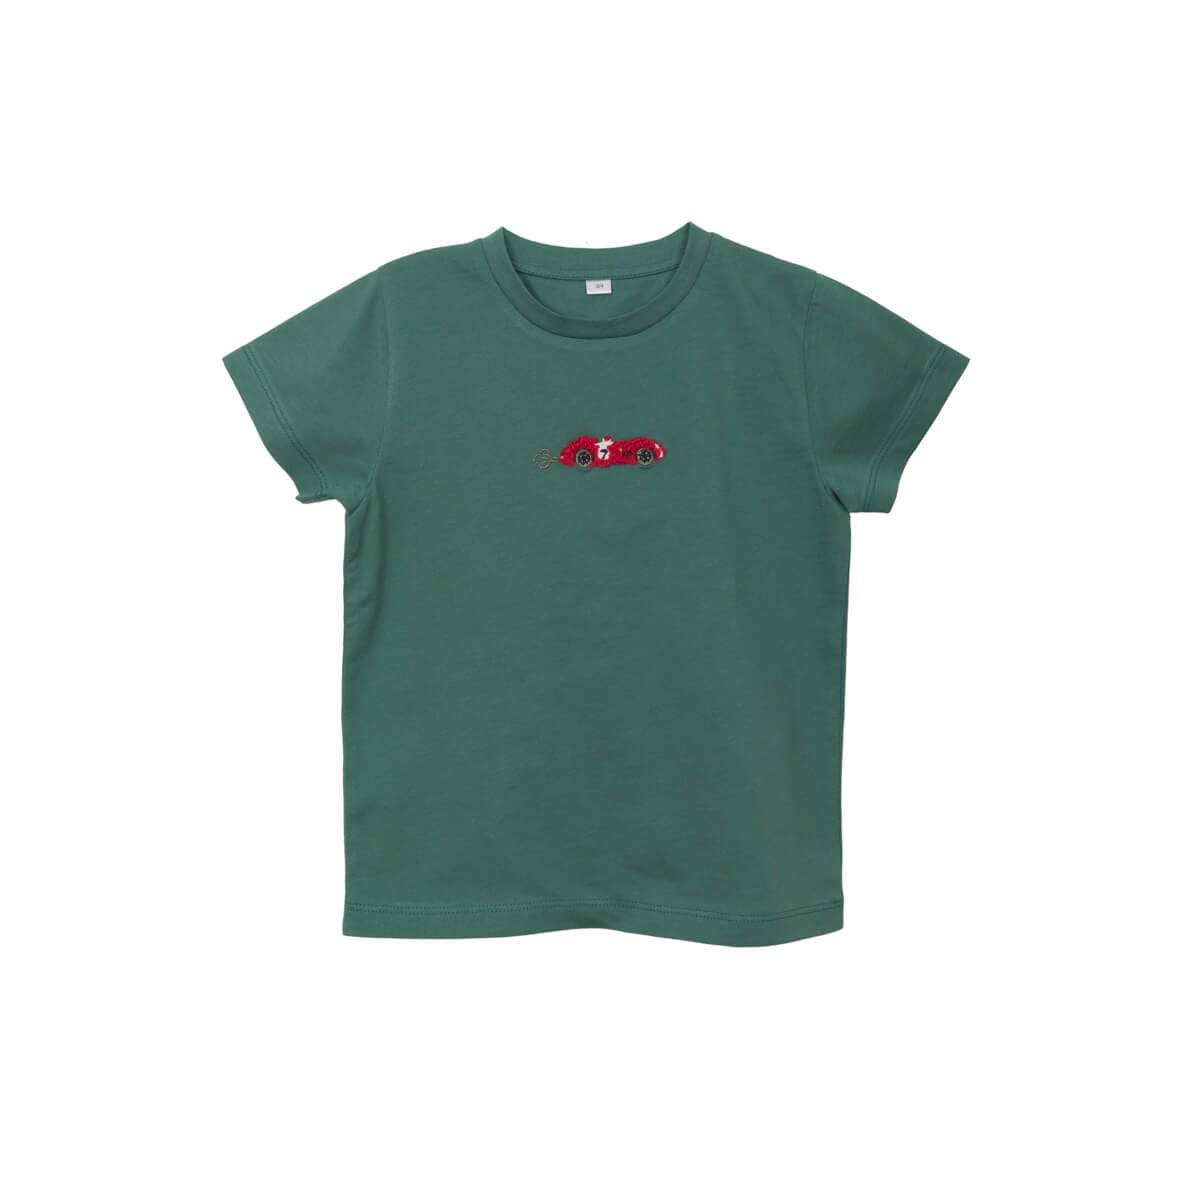 green kids t-shirt by Sophie Allport with embroidered red car on the front centre